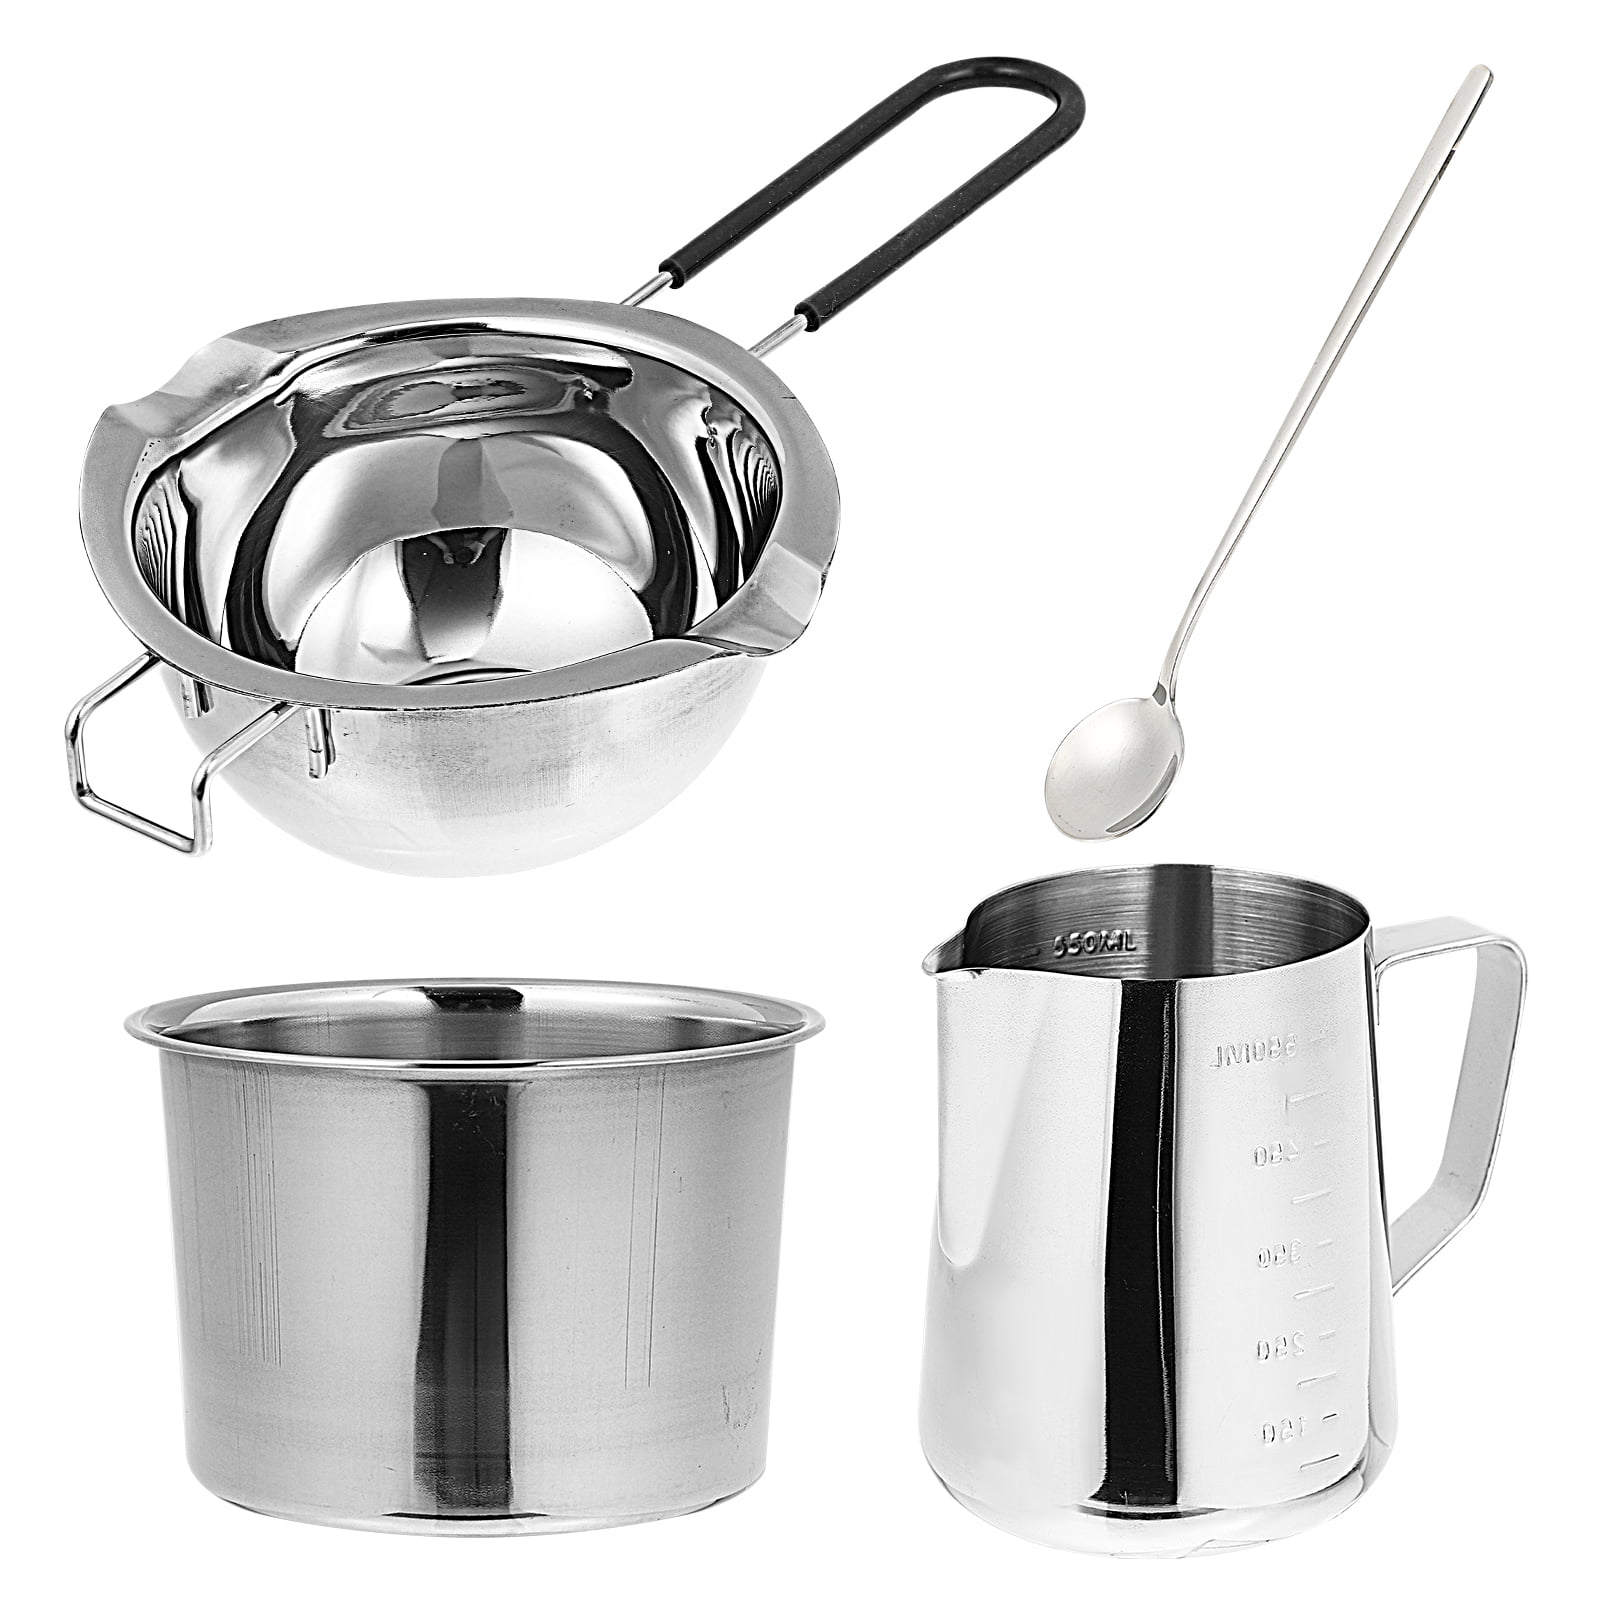 Stick Milk Pan Saucepan Butter Warmer Milk Boiling Melting Pot Chocolate Pot Stainless Steel Frothing Coffee Pitcher for Home Kitchen Silver 1000ml HEMOTON Non